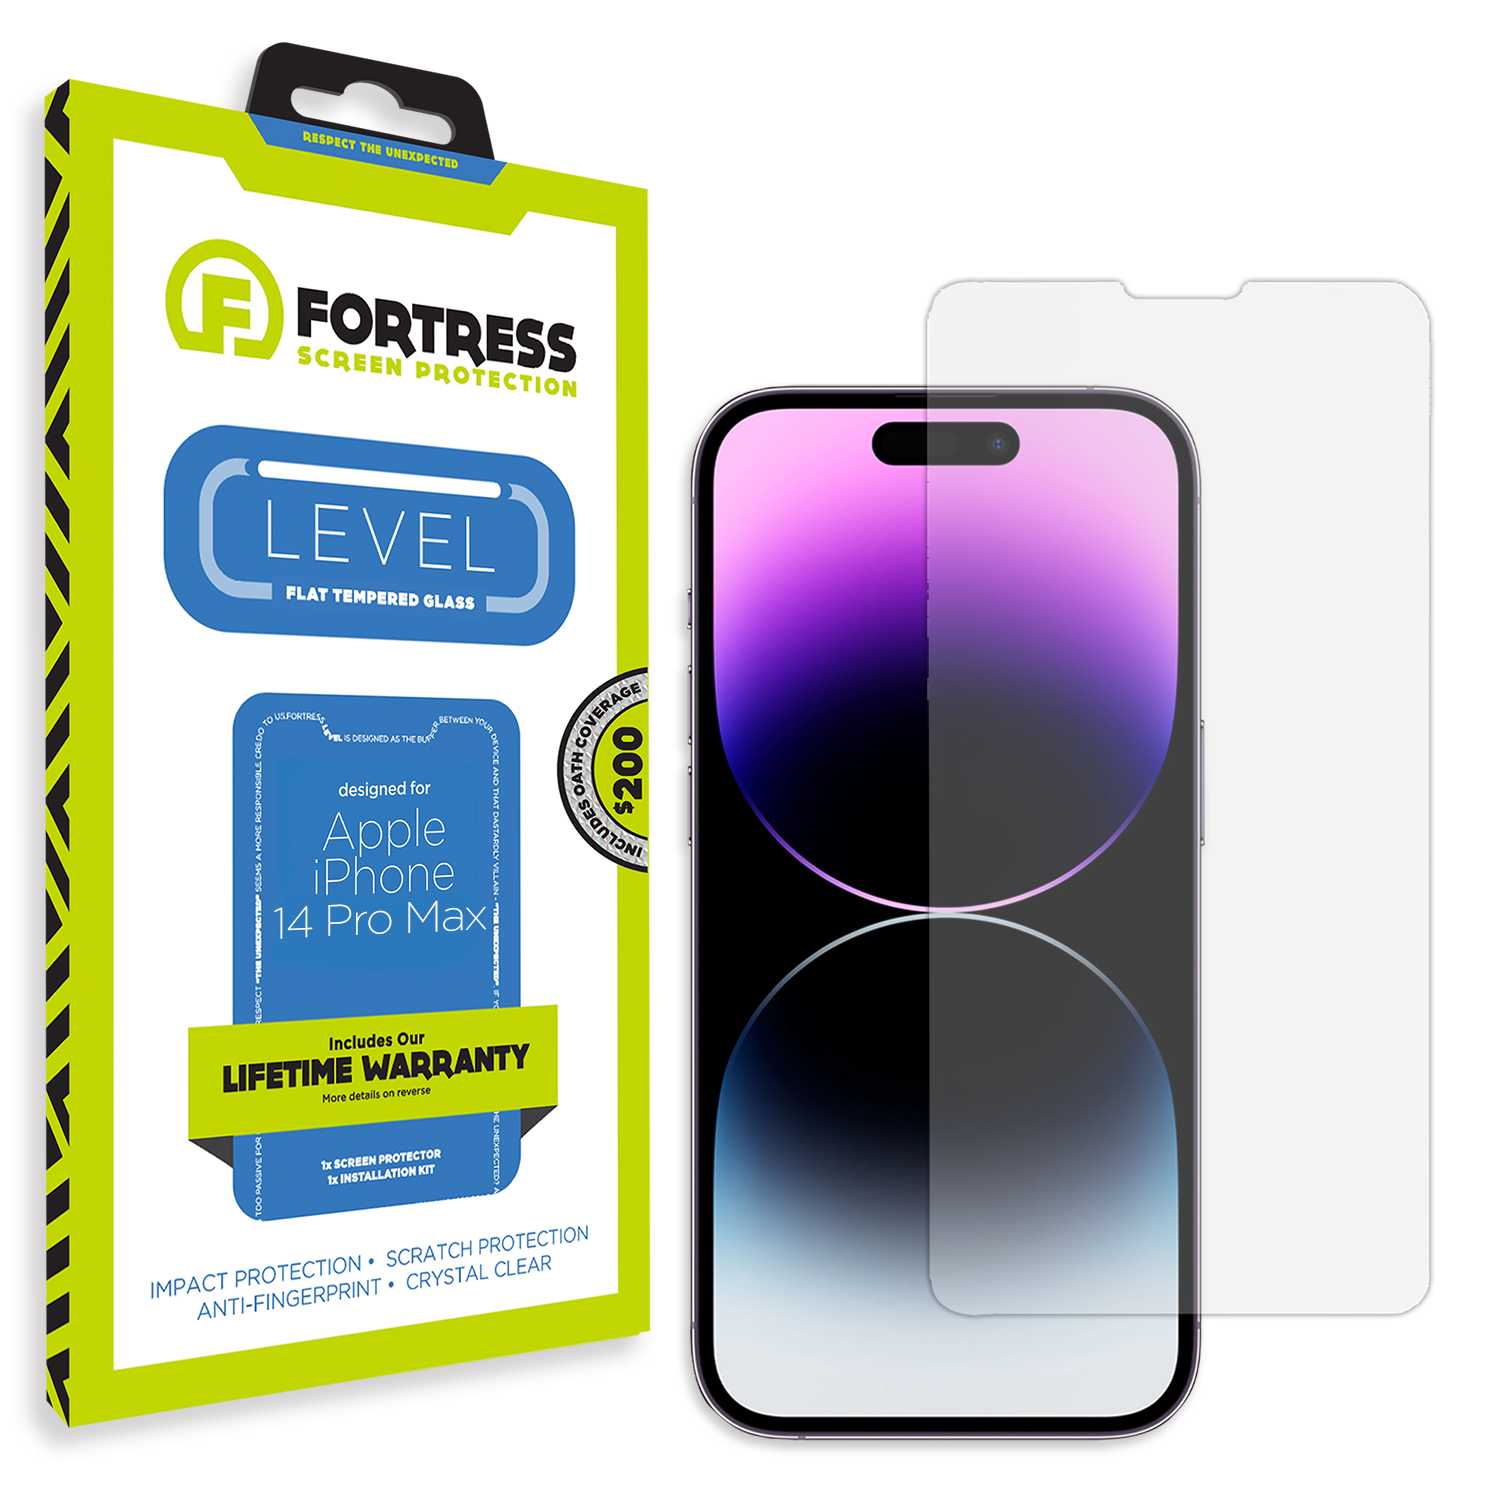 Fortress iPhone 14 Pro Max Screen Protector $200Coverage Scooch Screen Protector